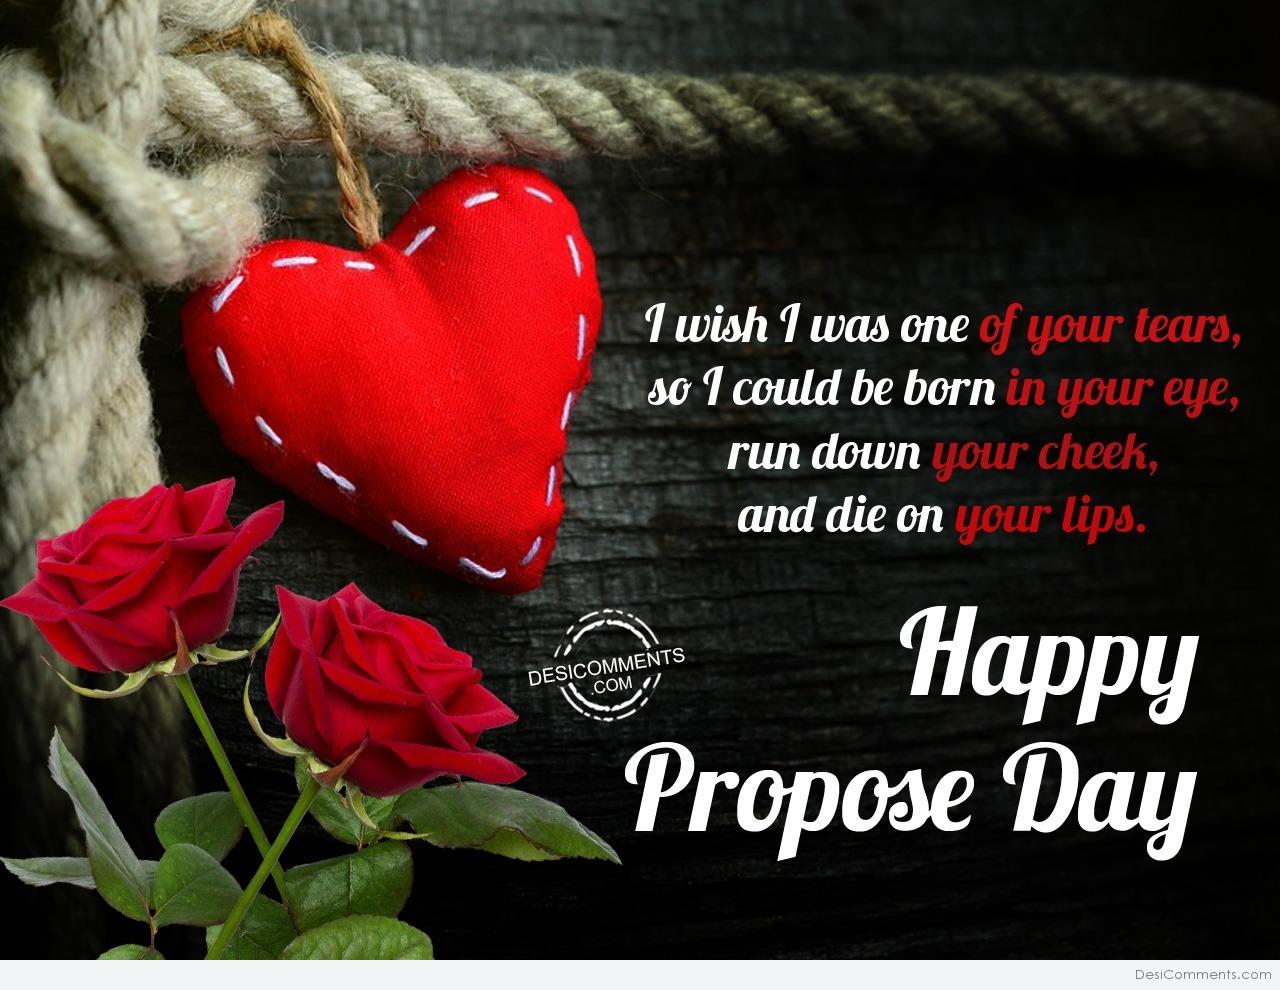 I wish I was one of your tears, Happy Propose Day - DesiComments.com